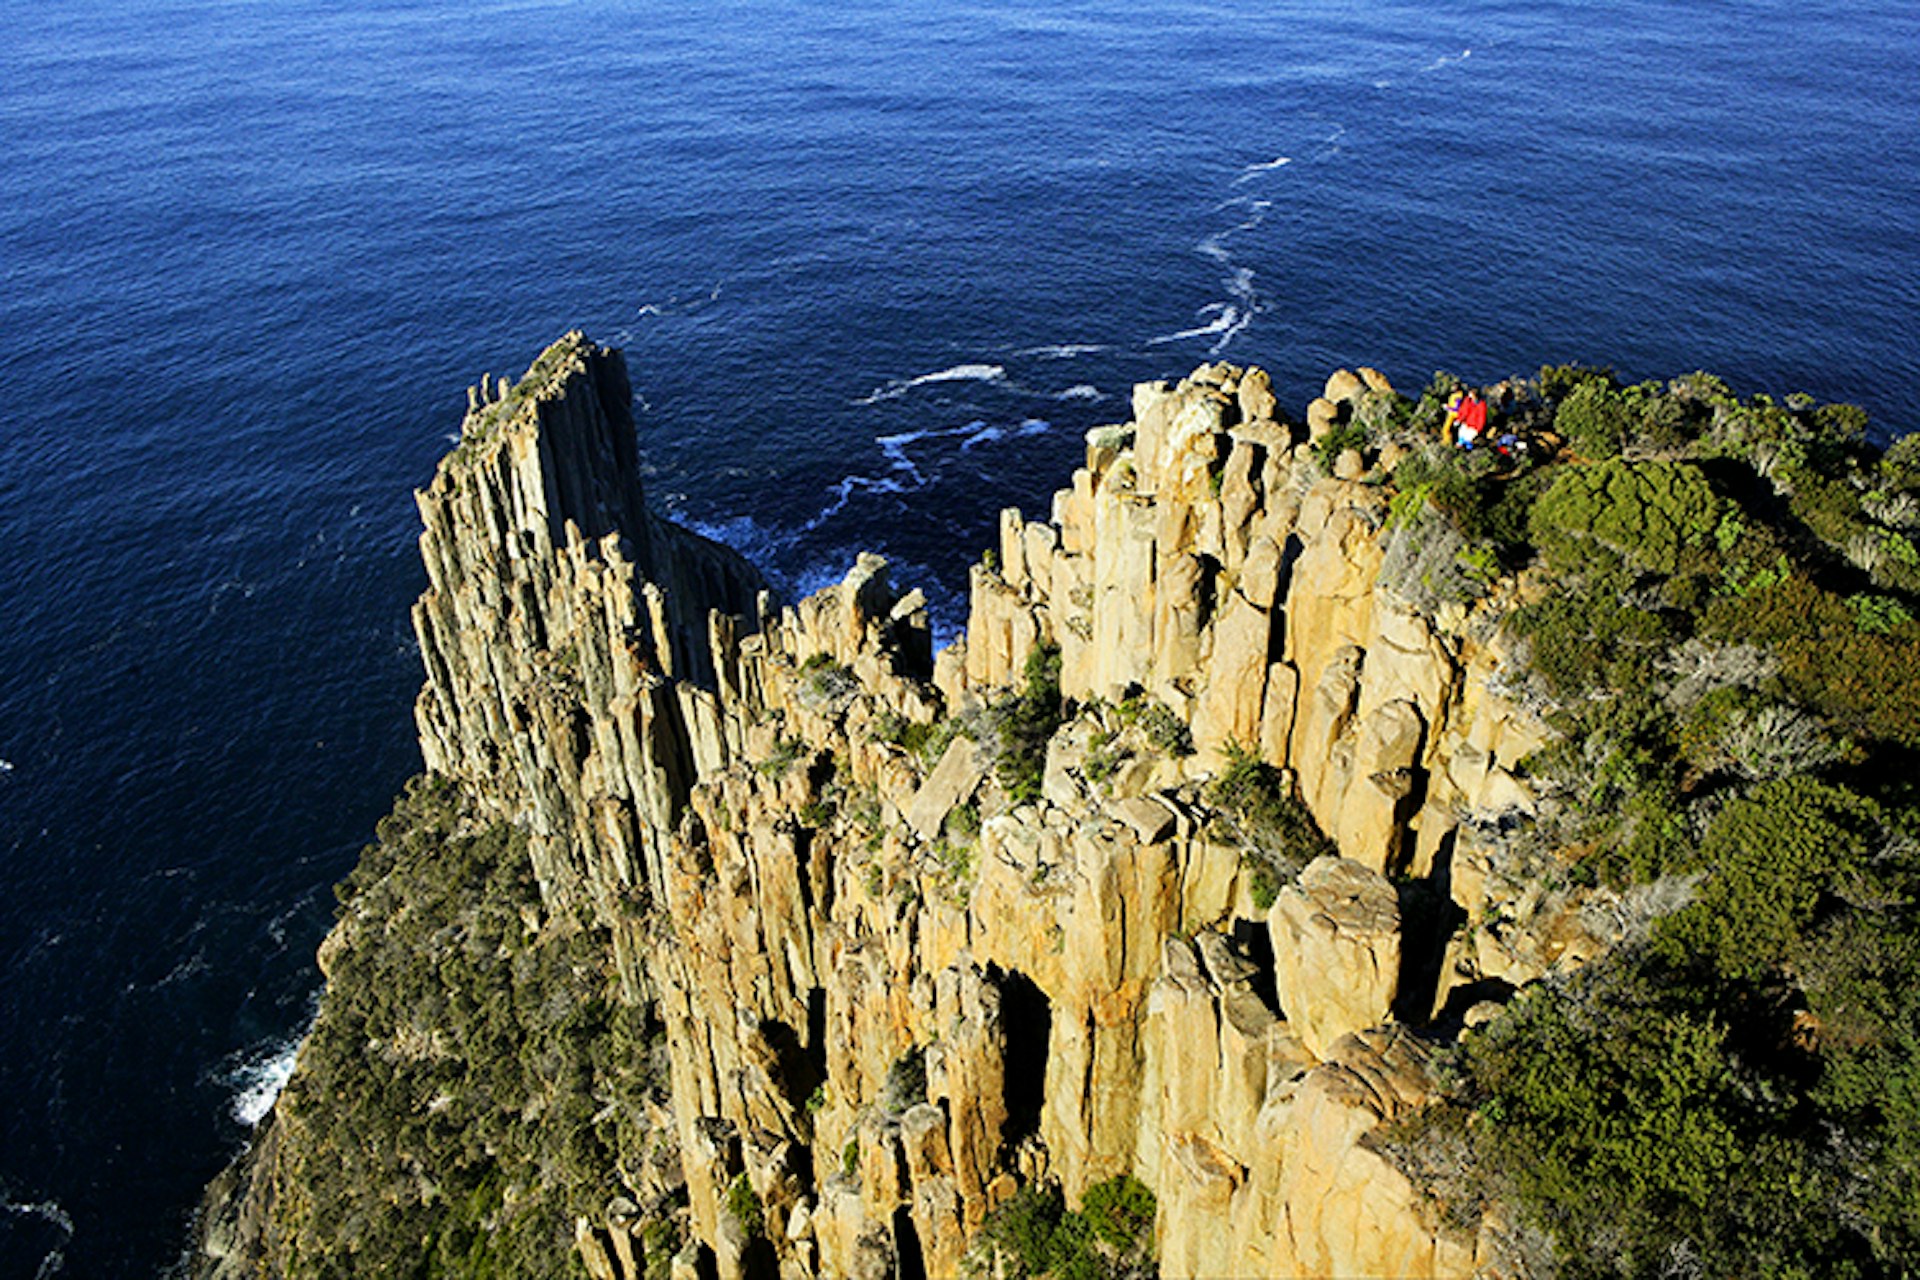 A section of the spectacular Three Capes Track. Image courtesy of Joe Shemesh and Tasmania Parks and Wildlife Service.